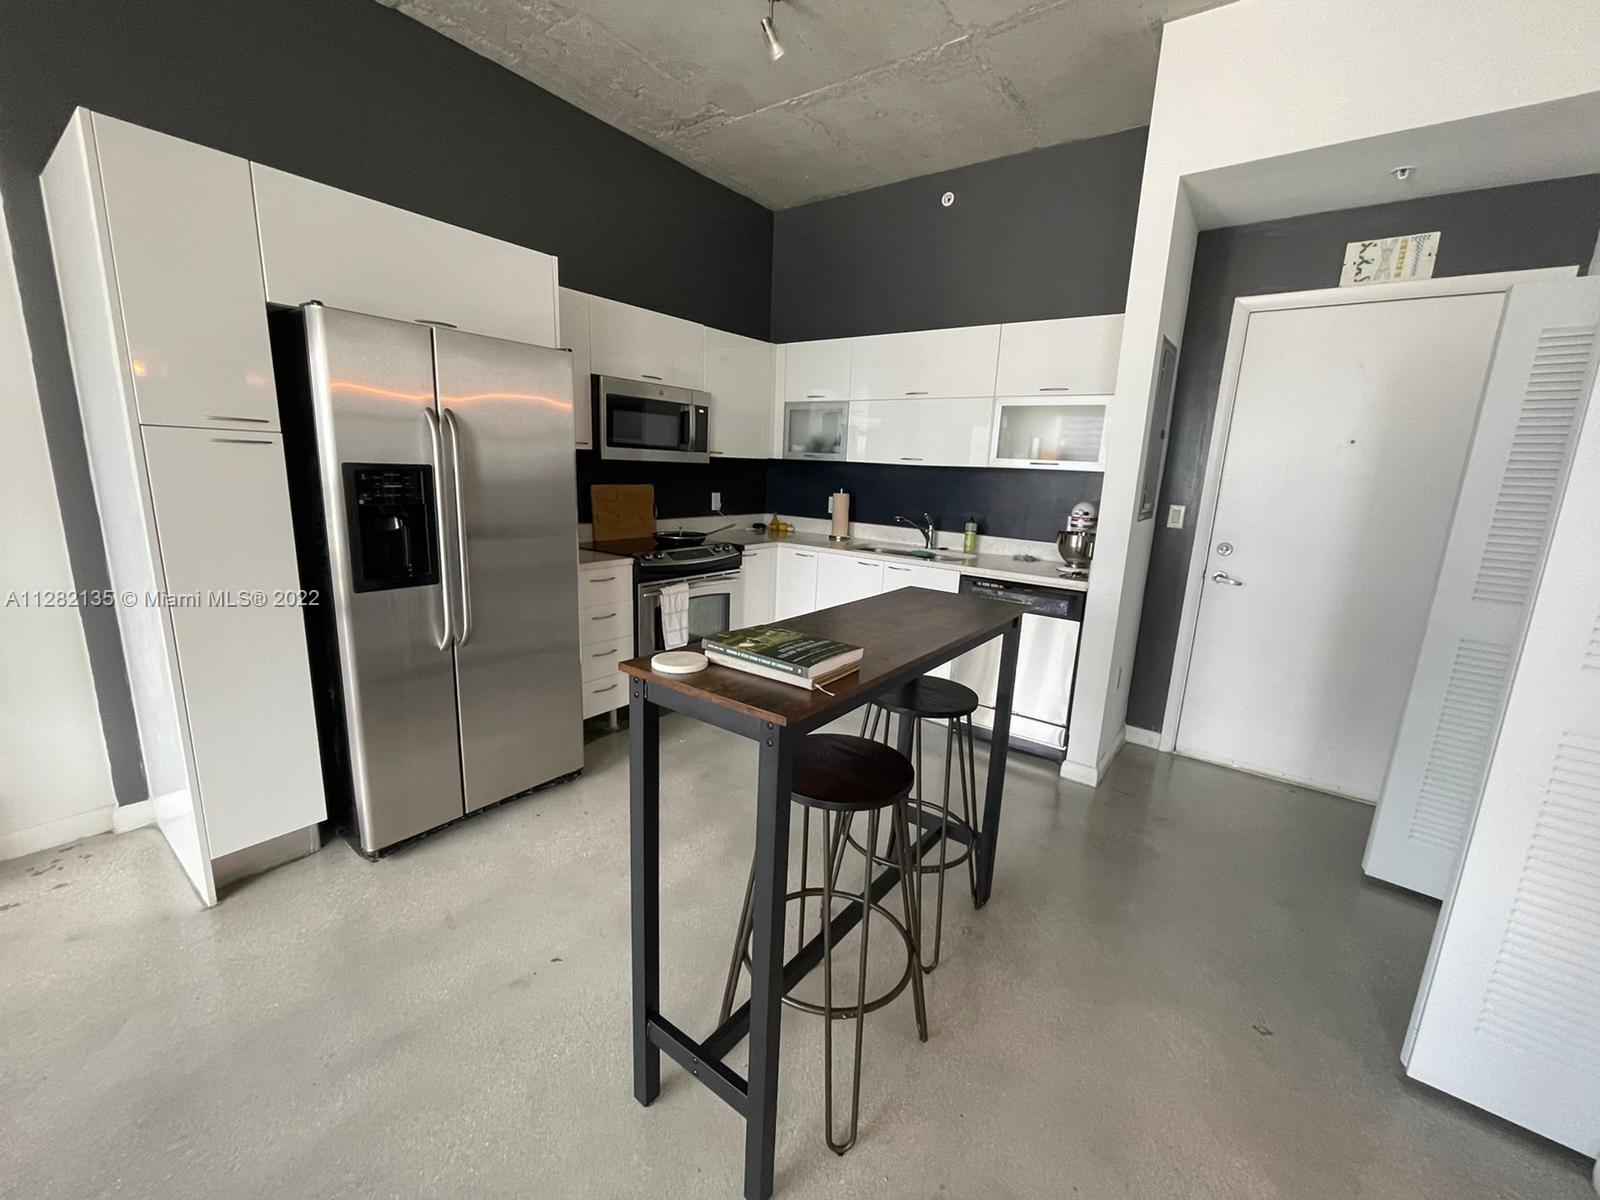 Beautiful loft style located in the heart of downtown Washer and dryer inside the unit. Amenities: Rooftop pool overlooking Biscayne bay, fitness center, spa, 24 hr, security.Walking distance to restaurants, American Airlines, Miami World Center. Parking space is not included, if the tenant needs a parking space is an additional fee.